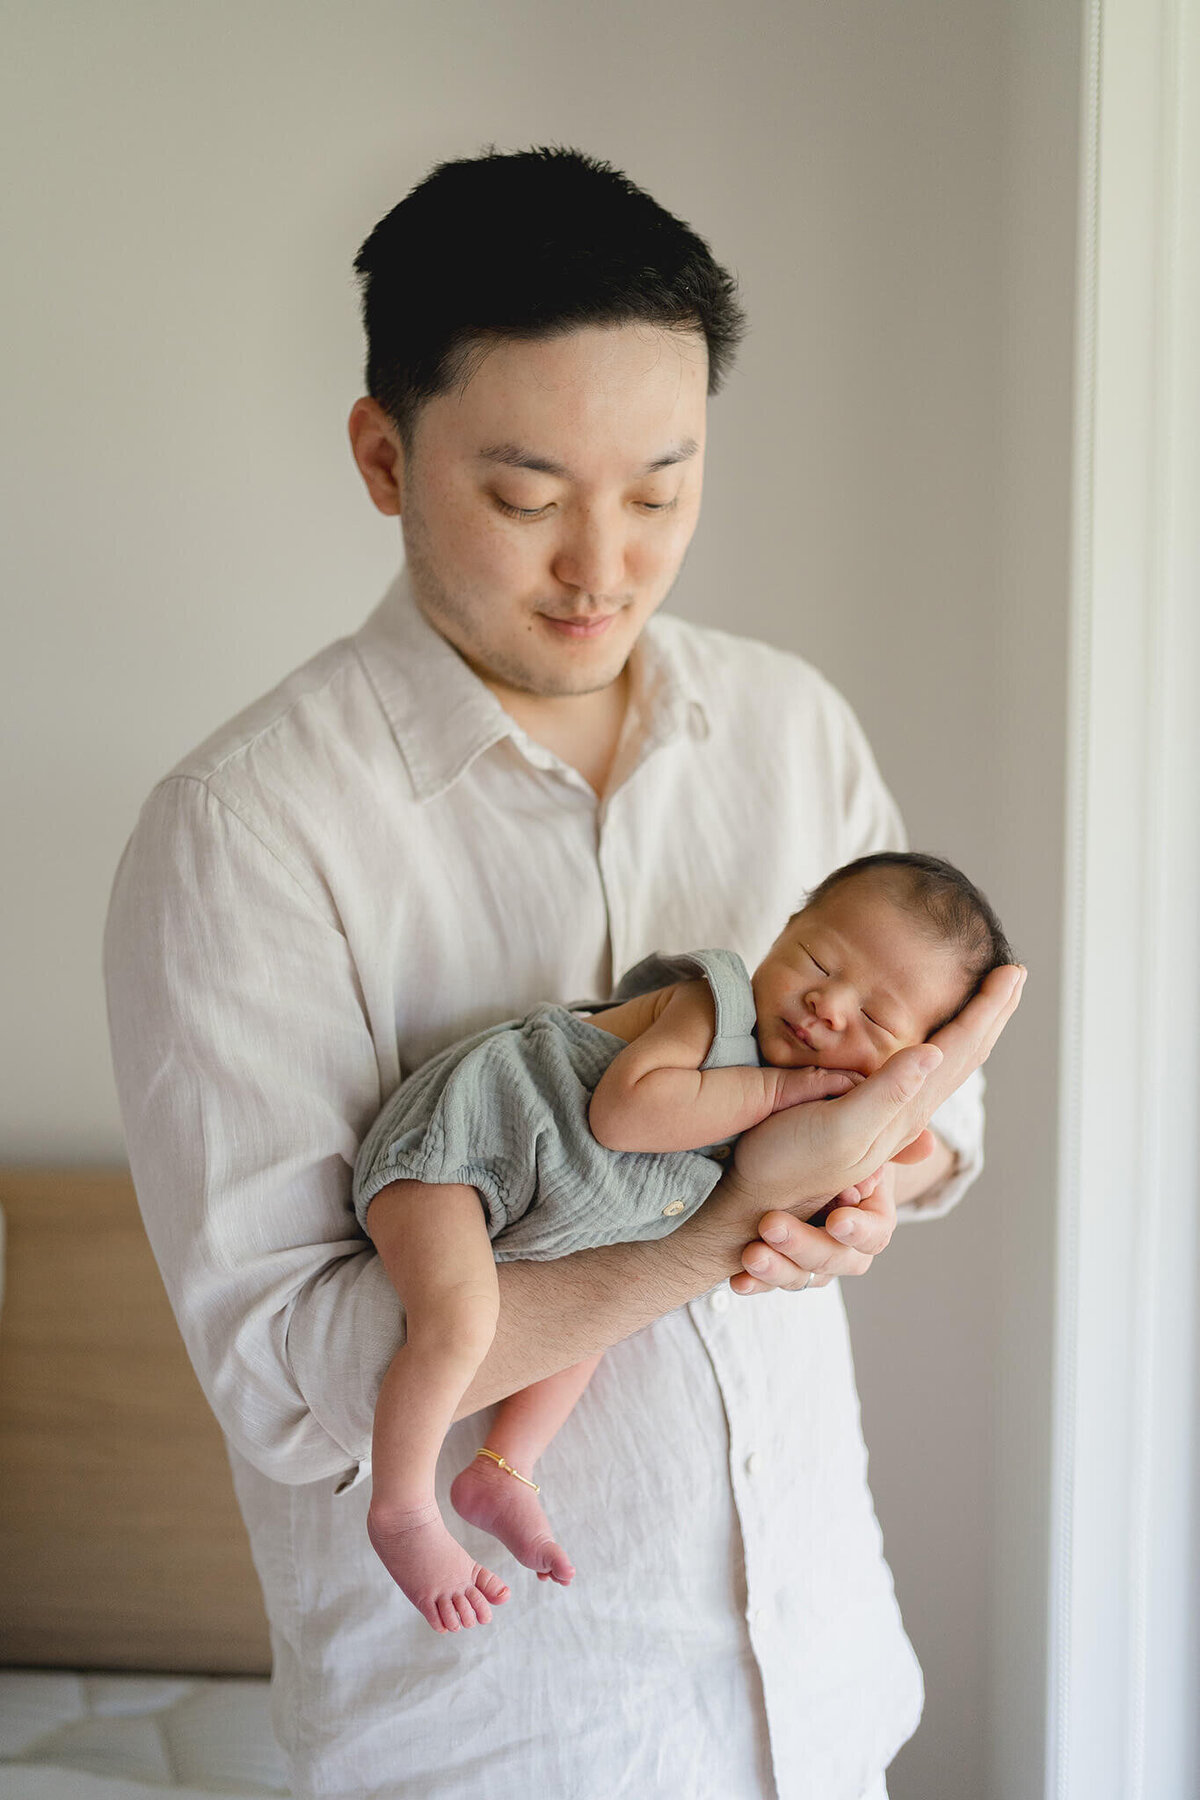 Witness the beauty of parenthood as a Chinese dad embraces their newborn in a heartwarming Gold Coast maternity shoot.